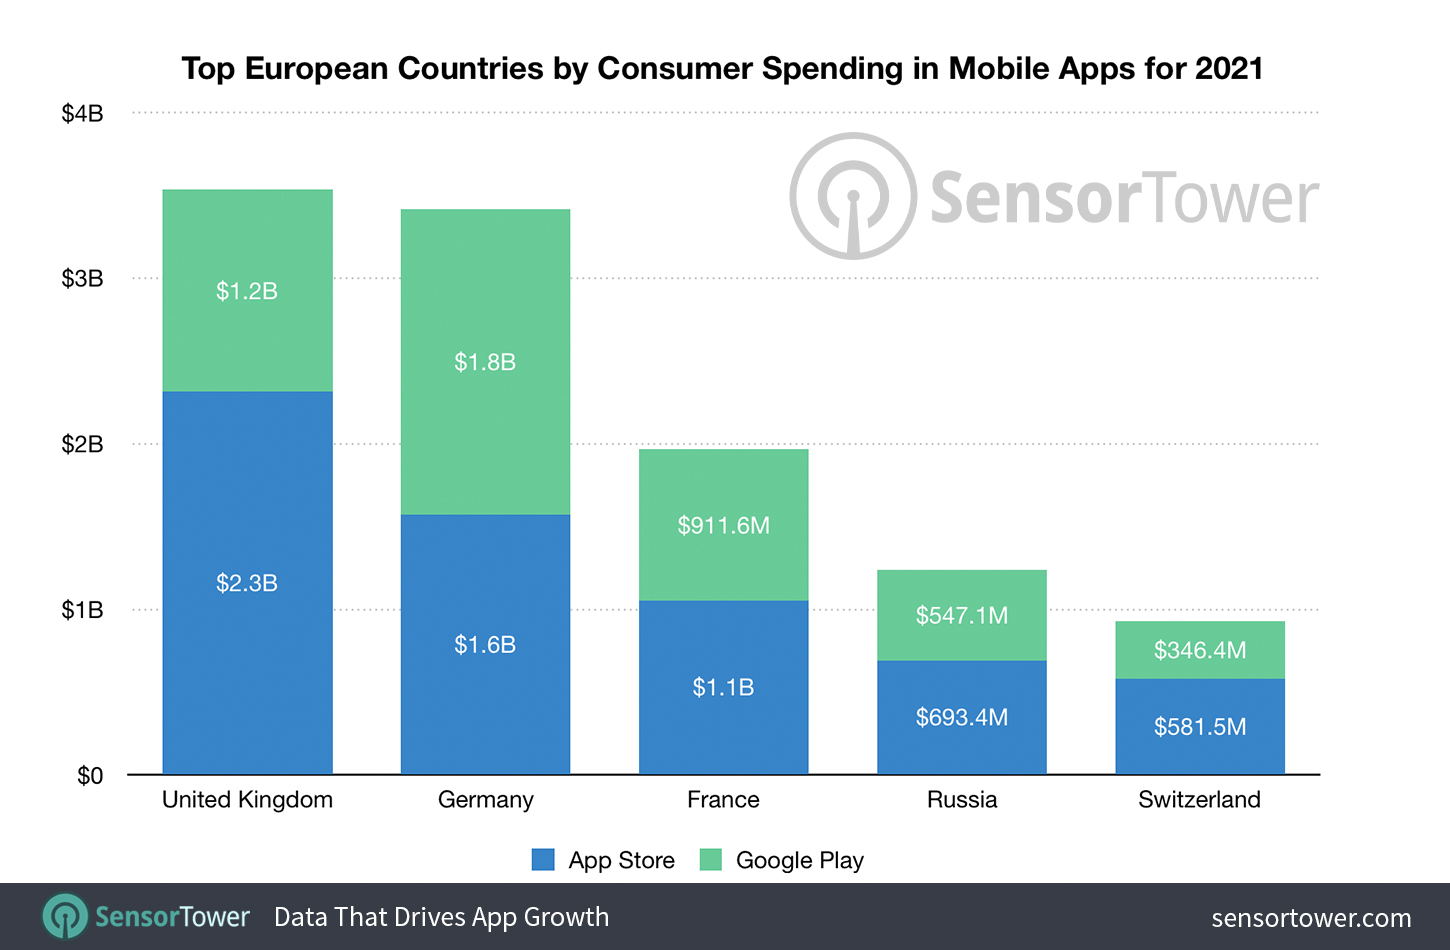 Top European Countries by Consumer Spending in Mobile Apps for 2021